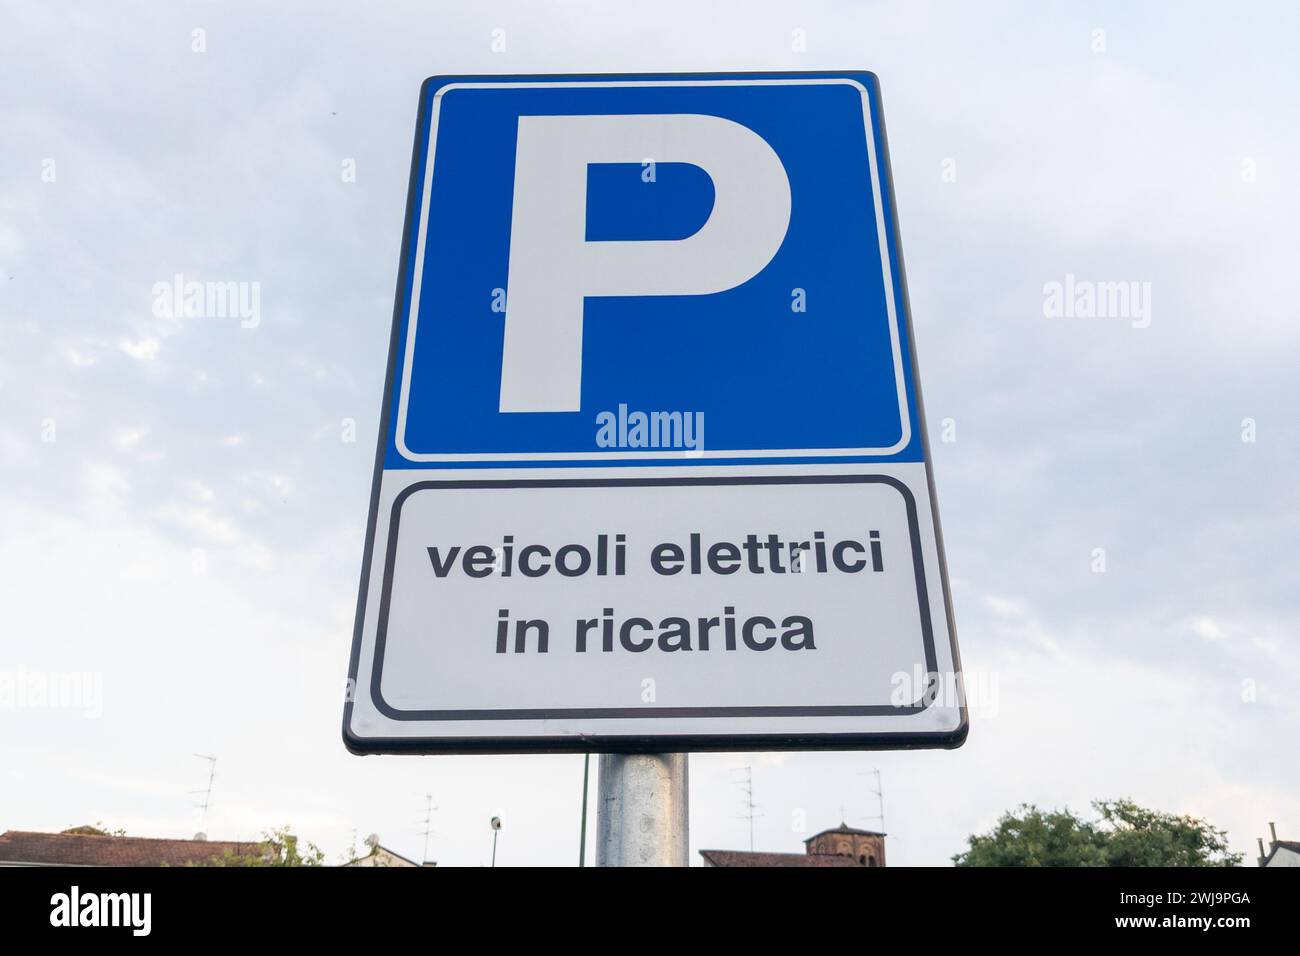 parking veicoli elettrici in ricarica italian text sign means parking of electric vehicles charging ev Station Signage Park lot for electric car in ch Stock Photo